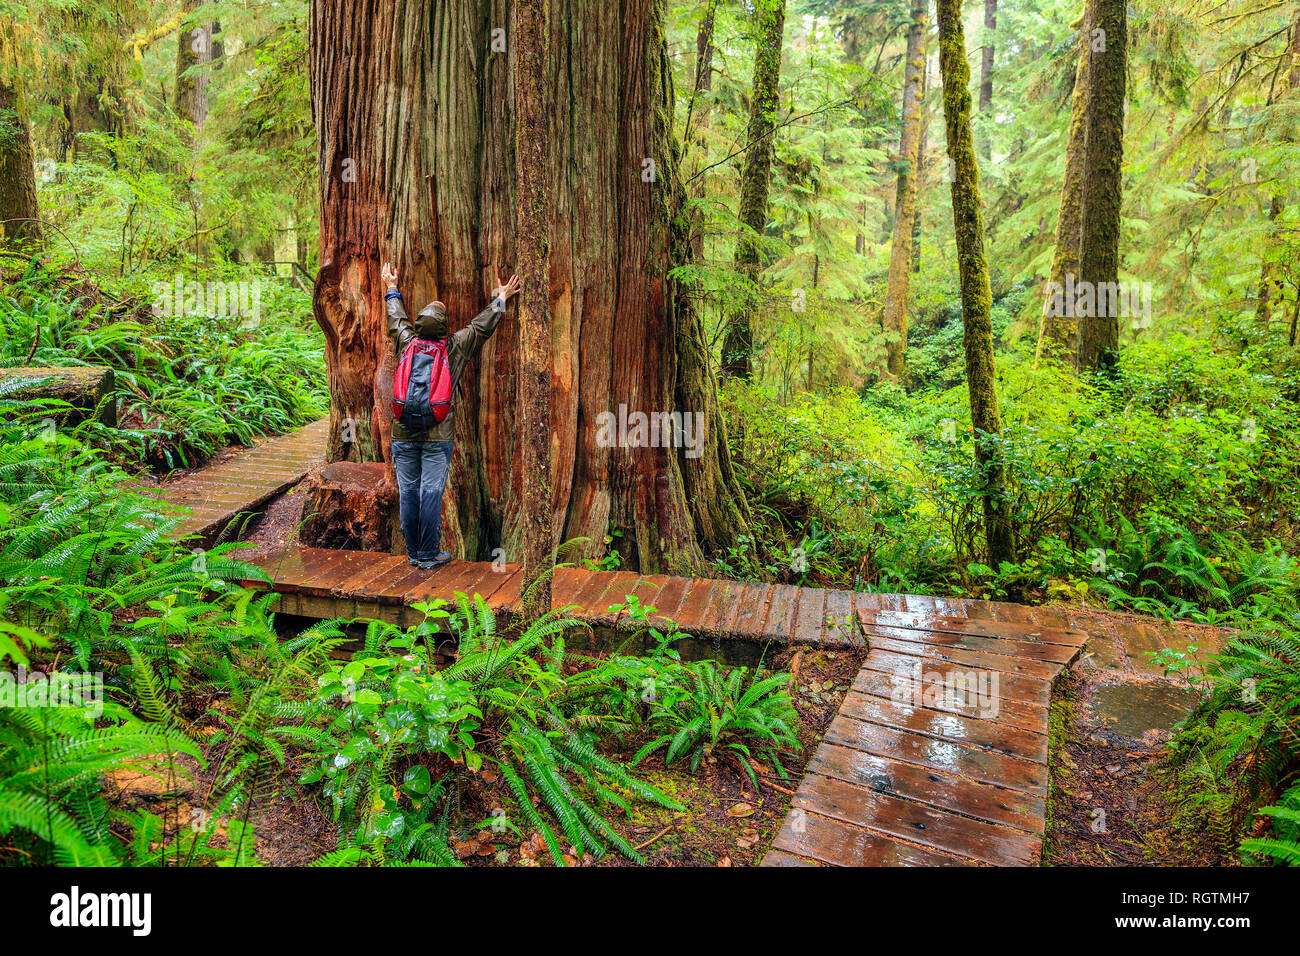 Hiker admiring a giant Western Red Cedar tree on the Rainforest Trail, Pacific Rim National Park, British Columbia, Canada. Stock Photo